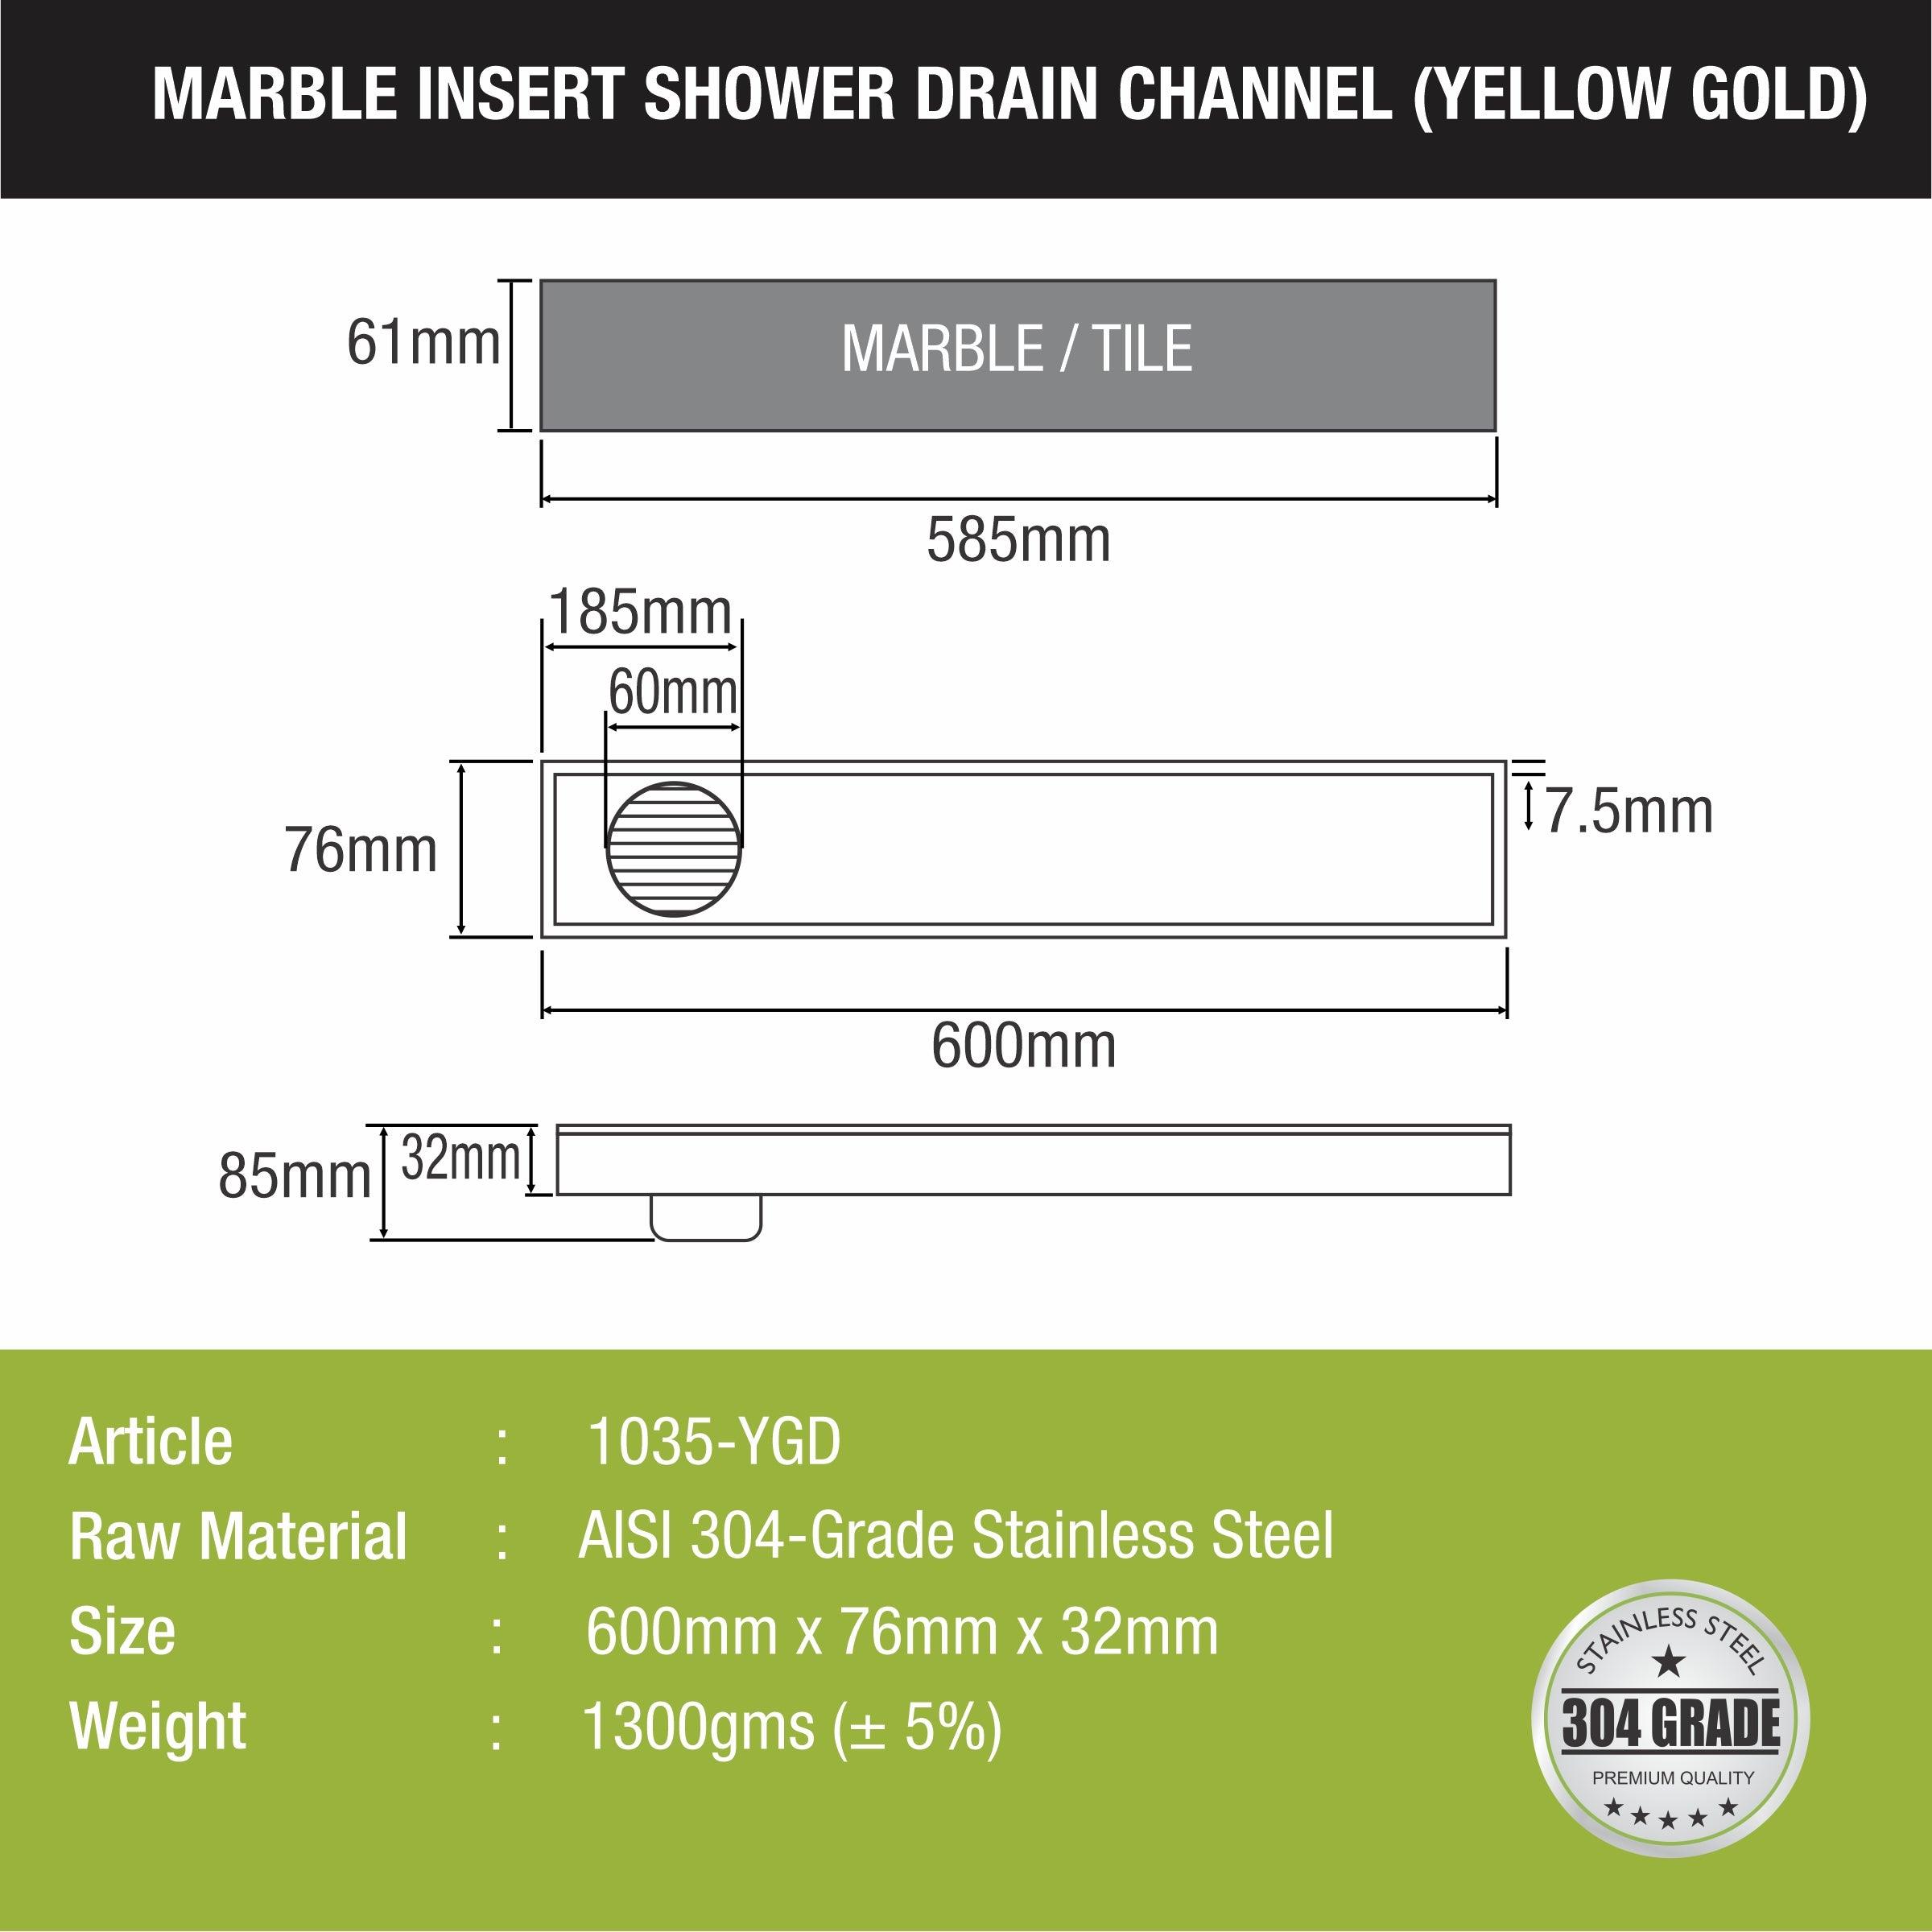 Marble Insert Shower Drain Channel - Yellow Gold (24 x 3 Inches) sizes and dimensions